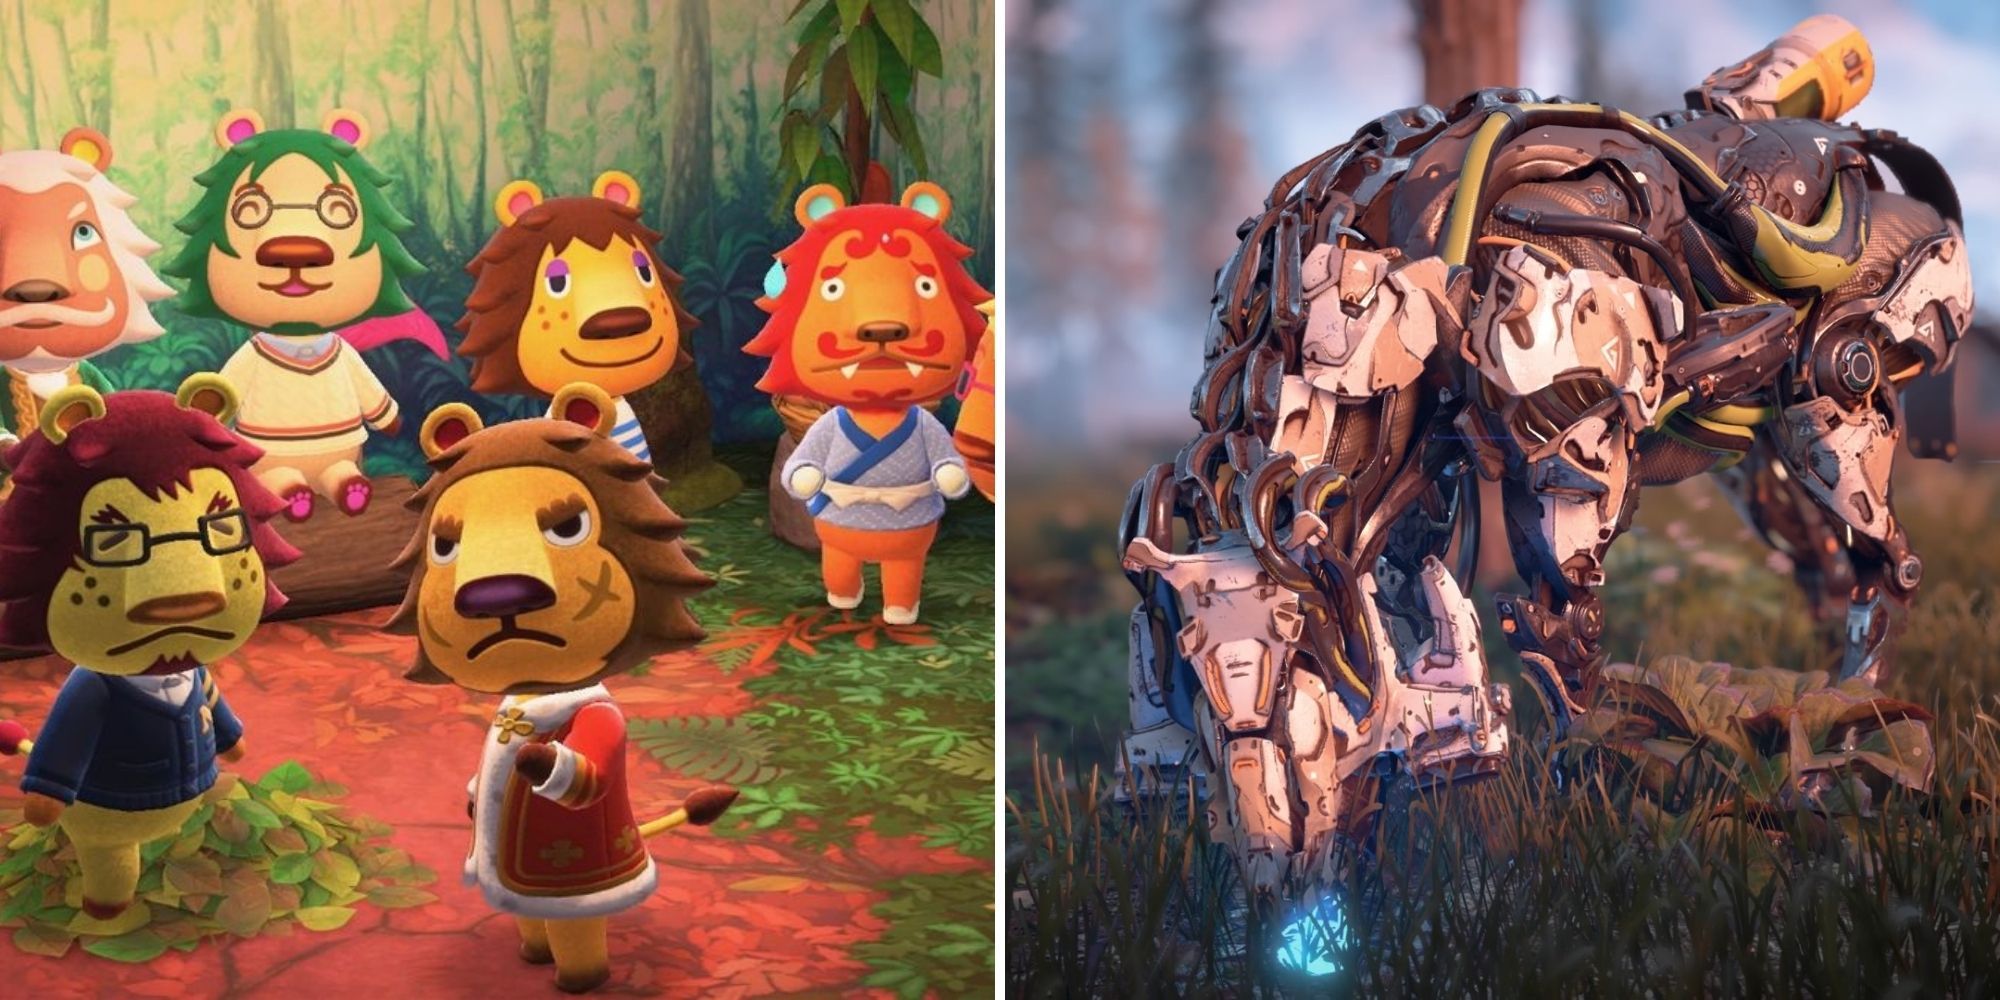 Split Image The Lions from Animal Crossing hanging out in a house while a Strider from Horizon chews on grass